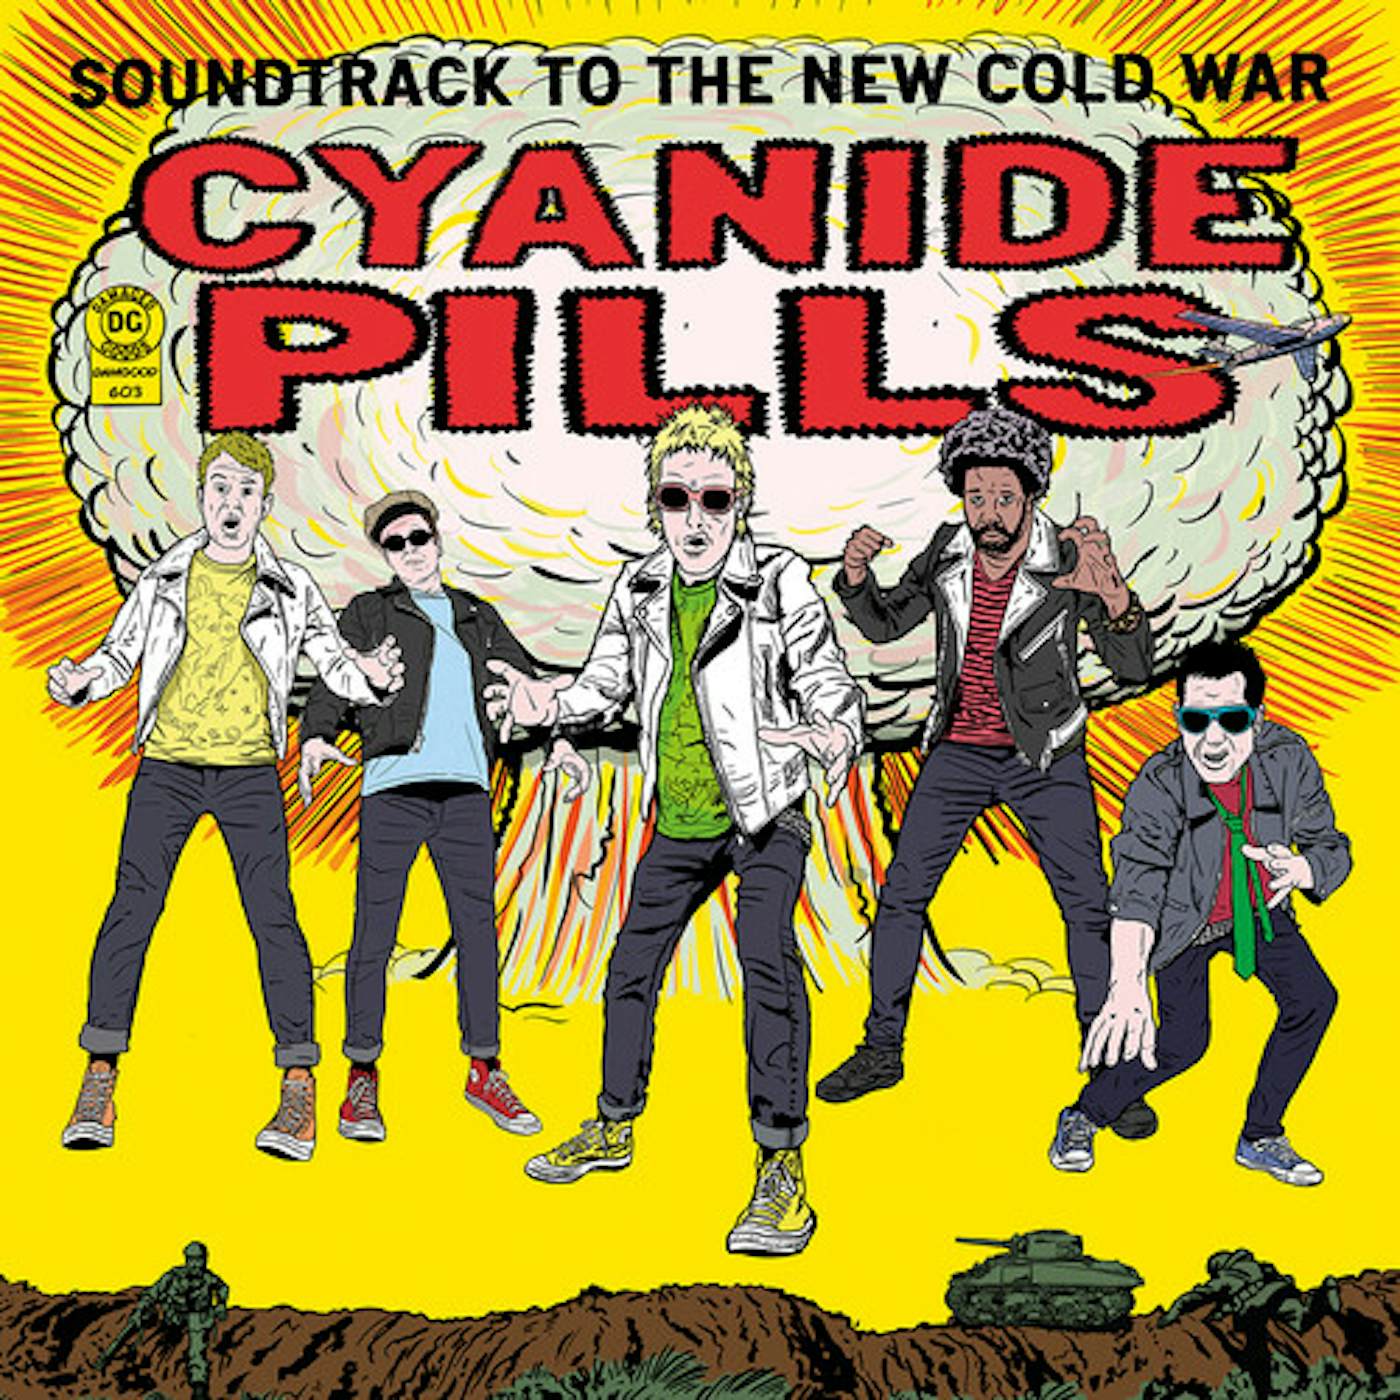 Cyanide Pills SOUNDTRACK TO THE NEW COLD WAR CD